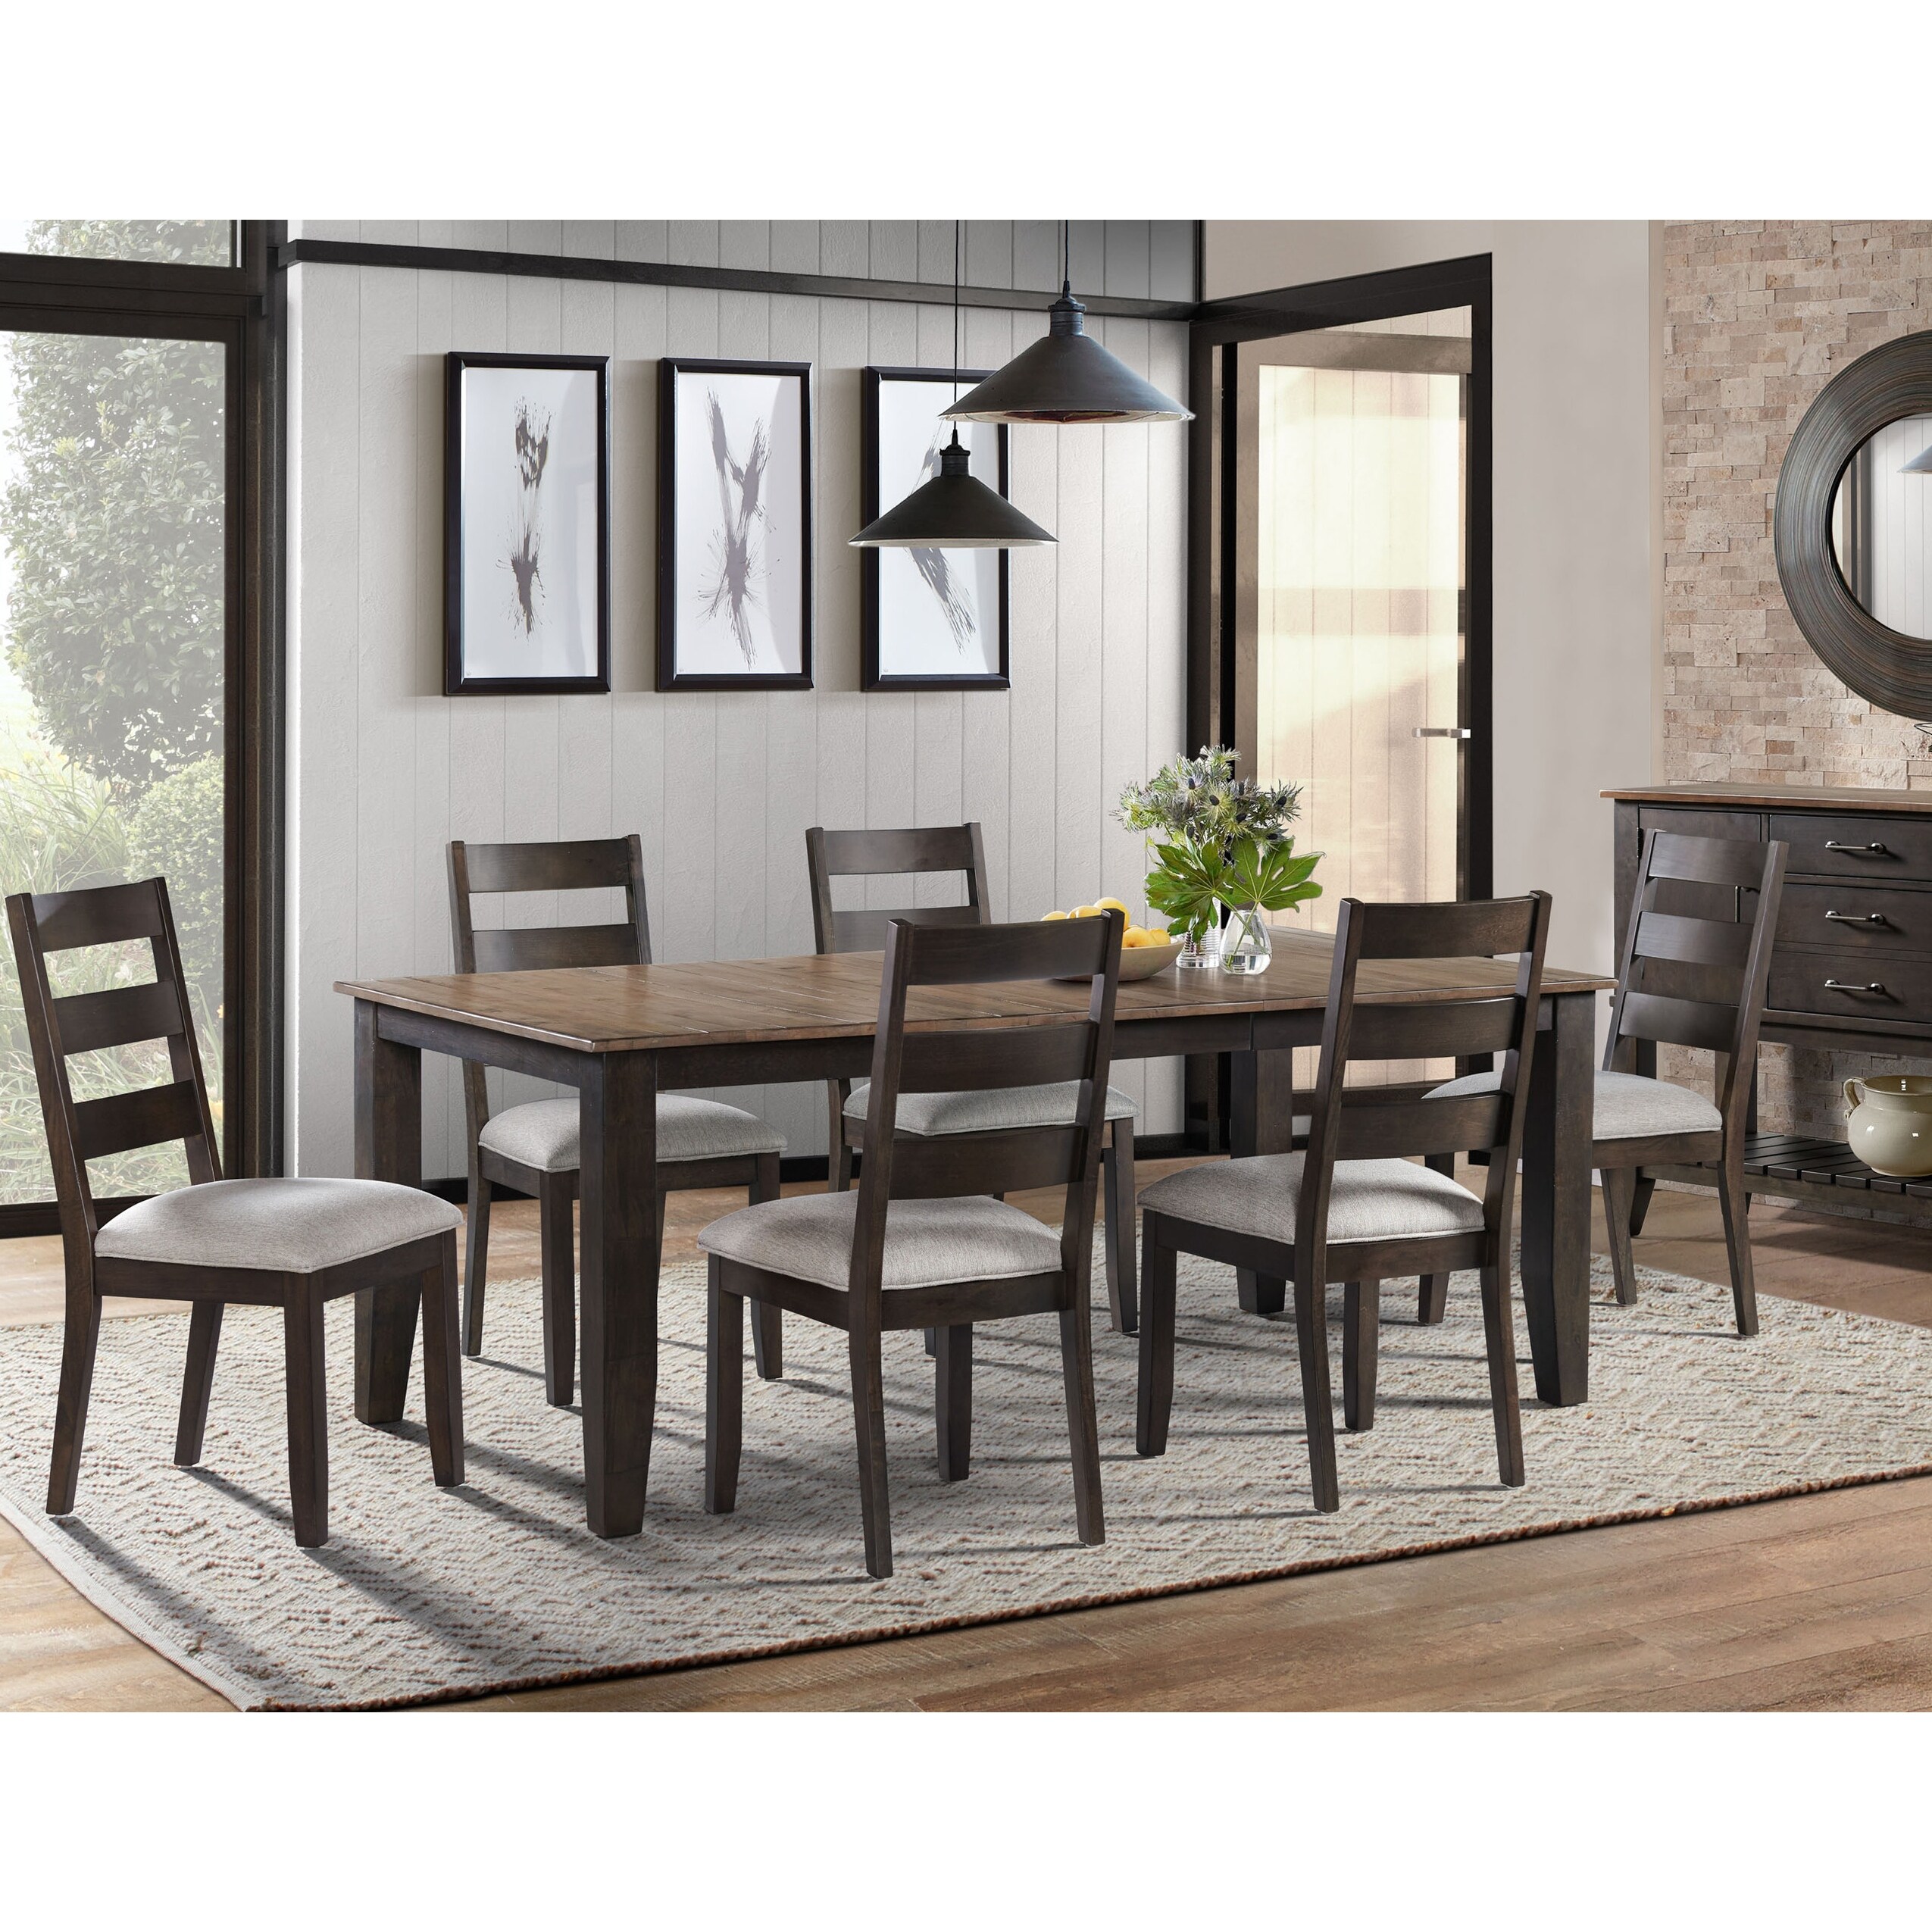 Beacon Black and Walnut Storing Leaf Dining Table